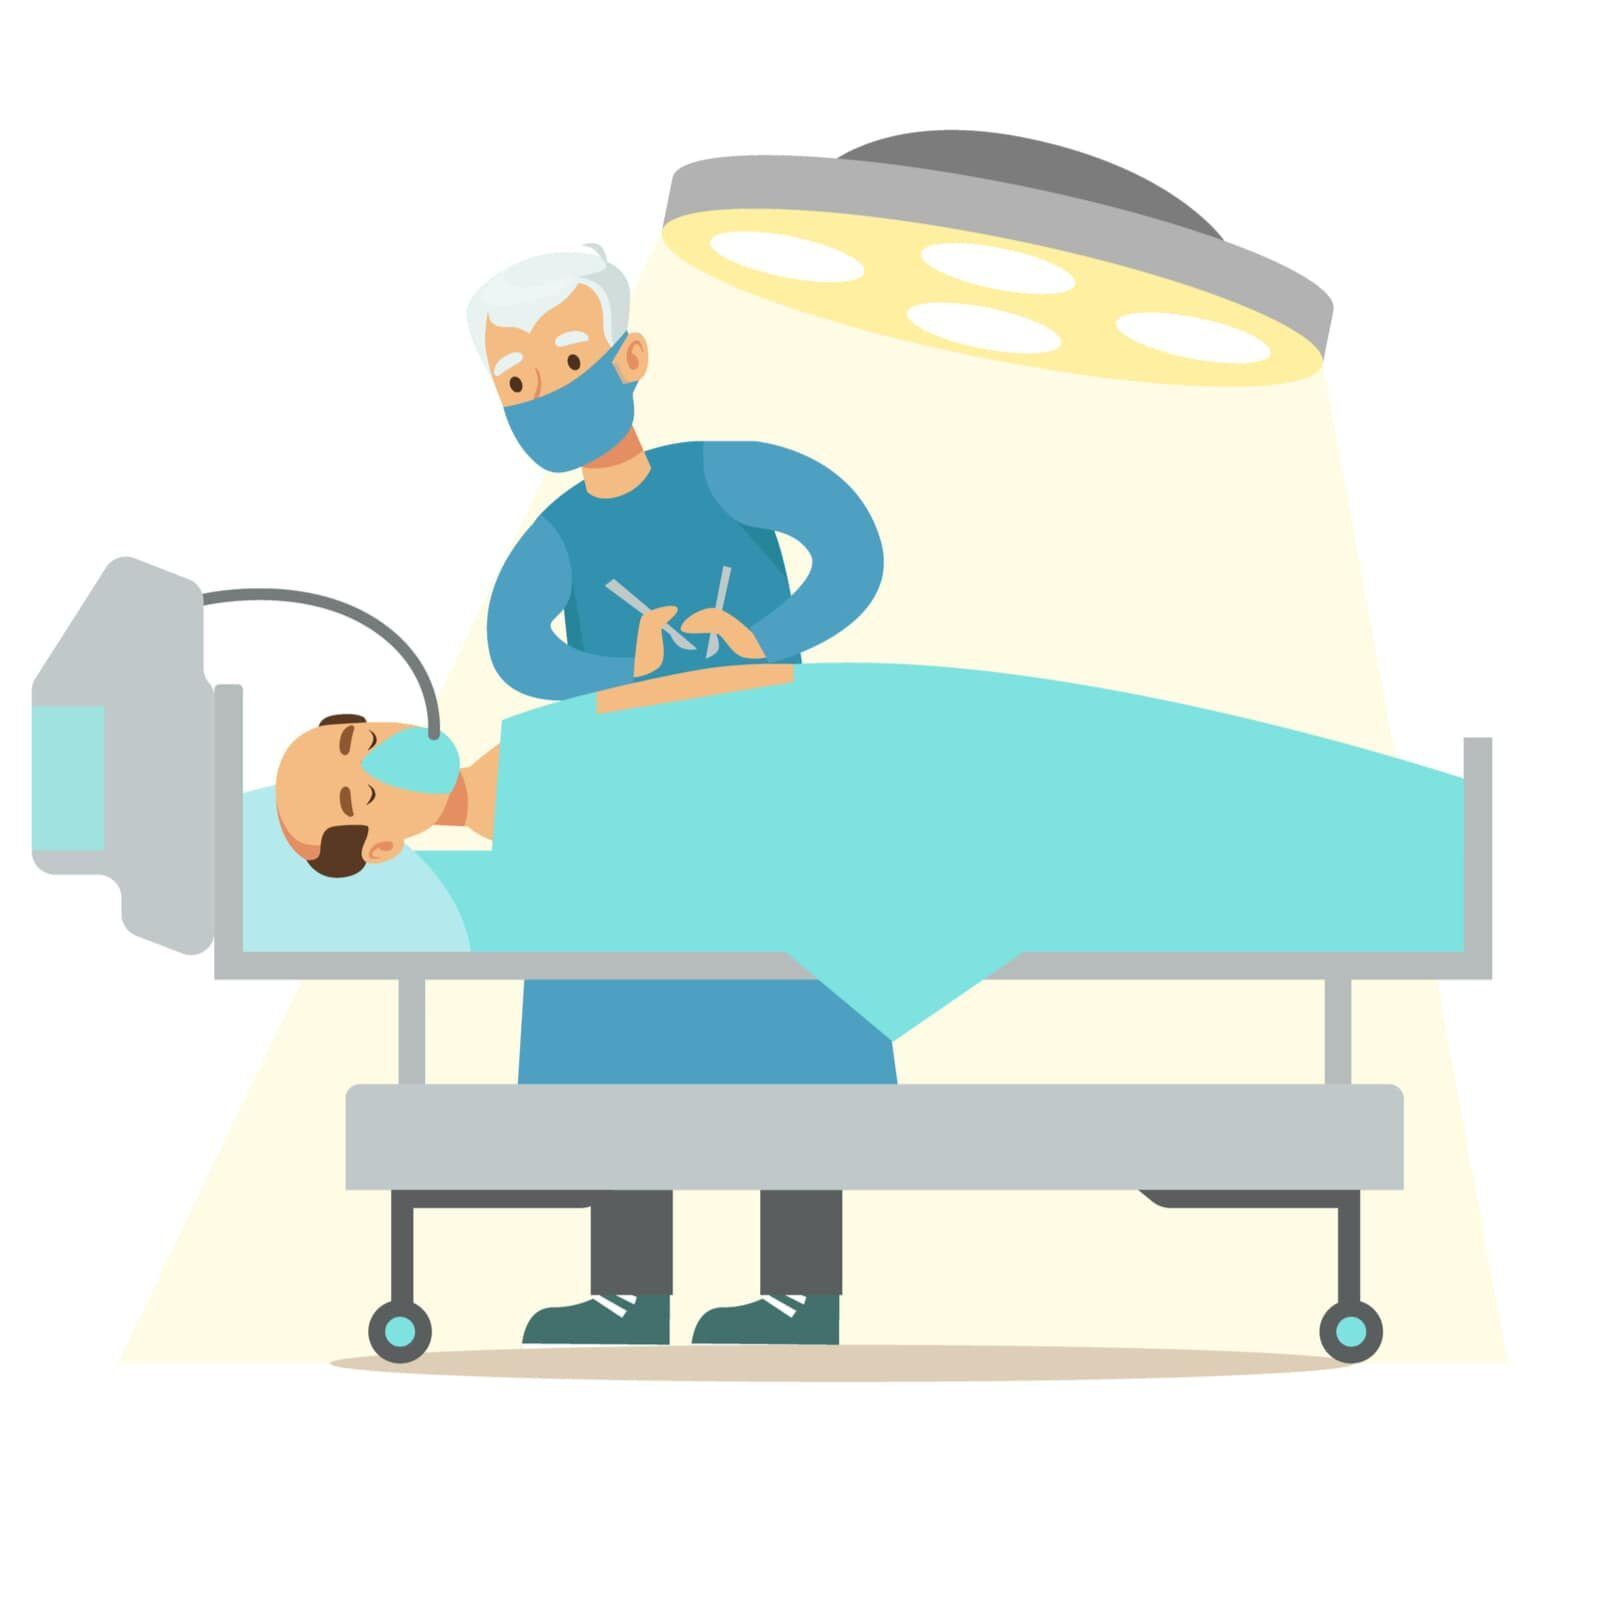 Surgeon Operating On Unconscious Patient In Surgery Room Illustration